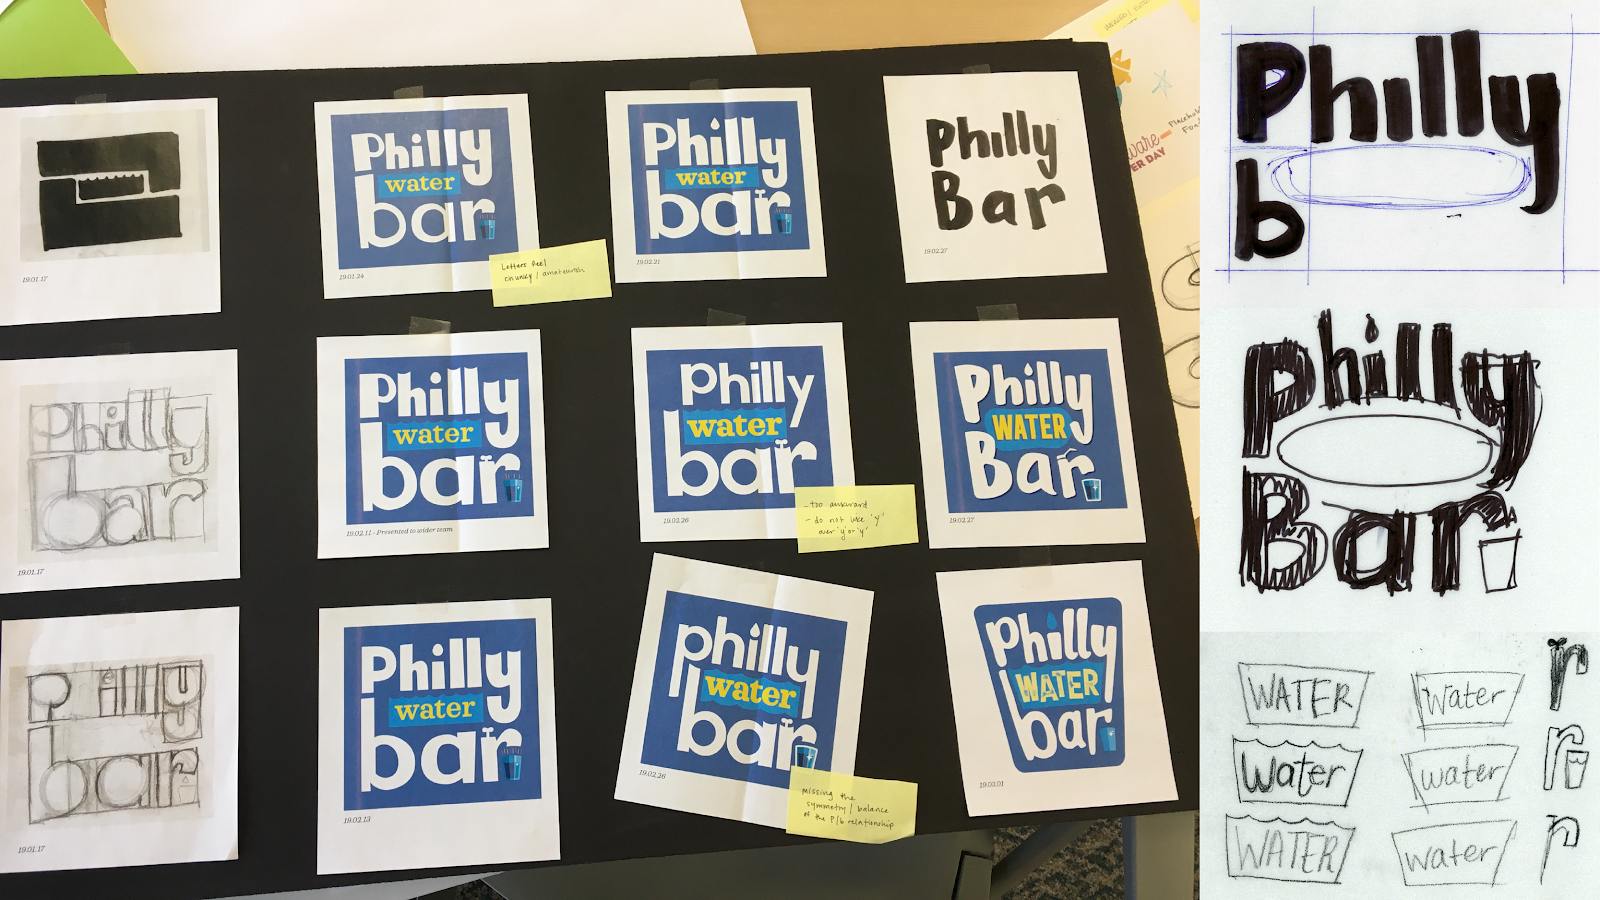 sketched ideas and various iterations of the Philly Water Bar logo pasted on a black board, with sticky-note comments next to some drafts